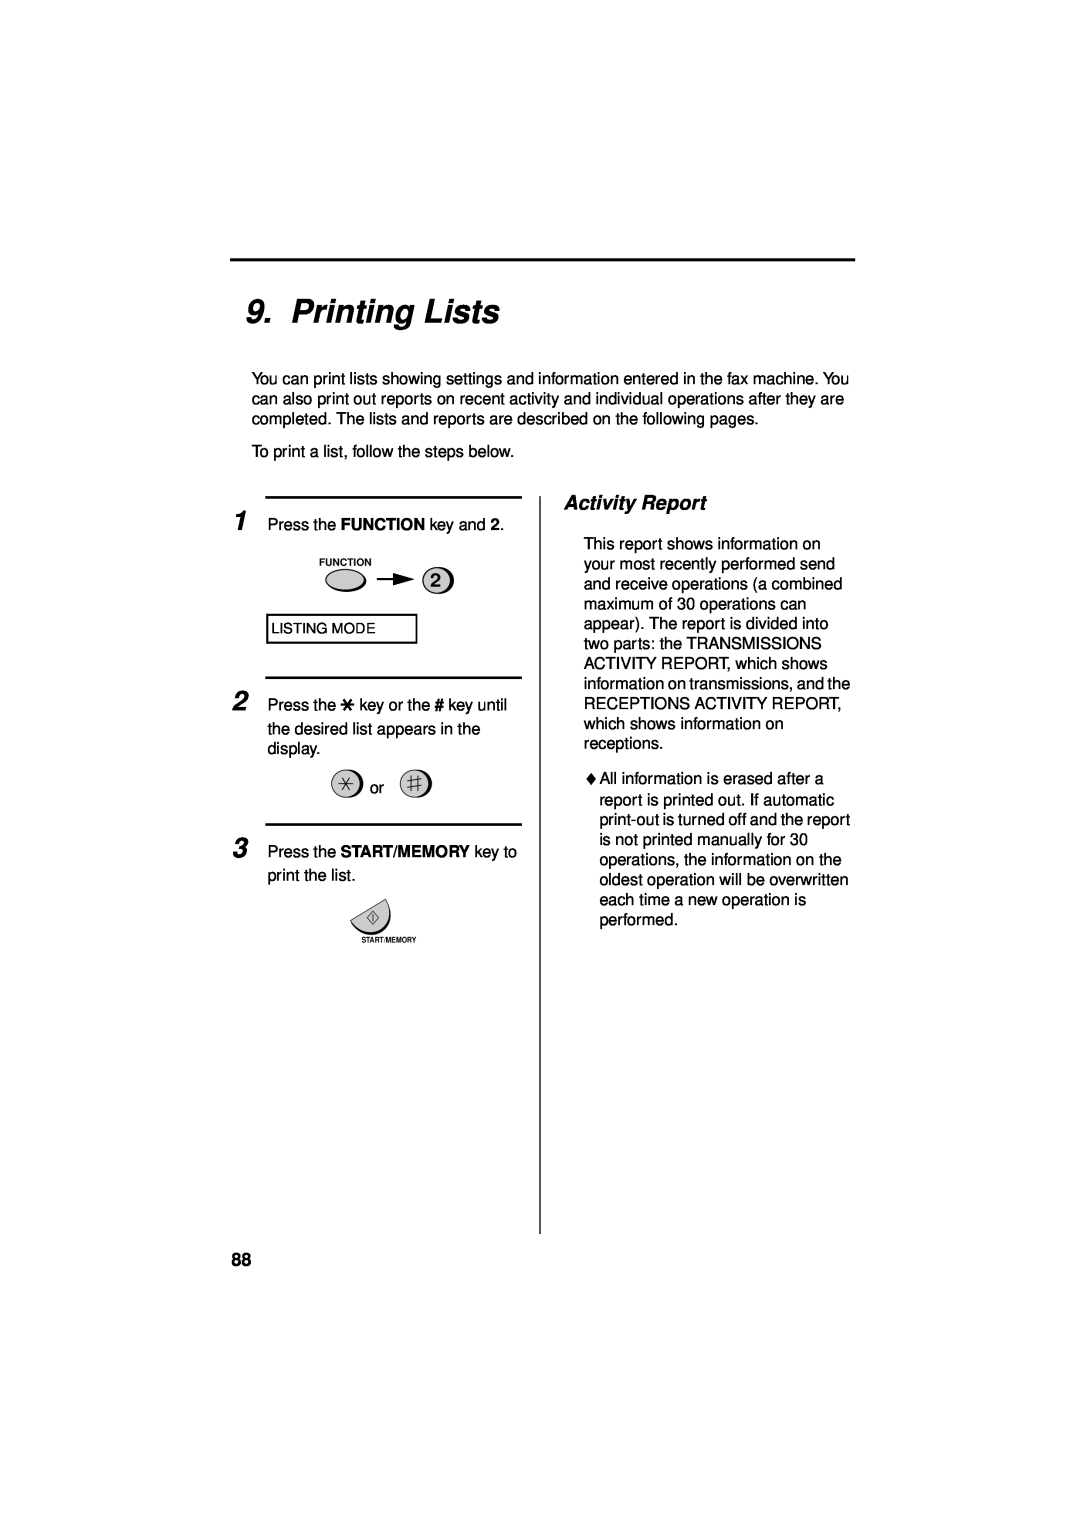 Sharp UX-340LM manual Printing Lists, Activity Report 